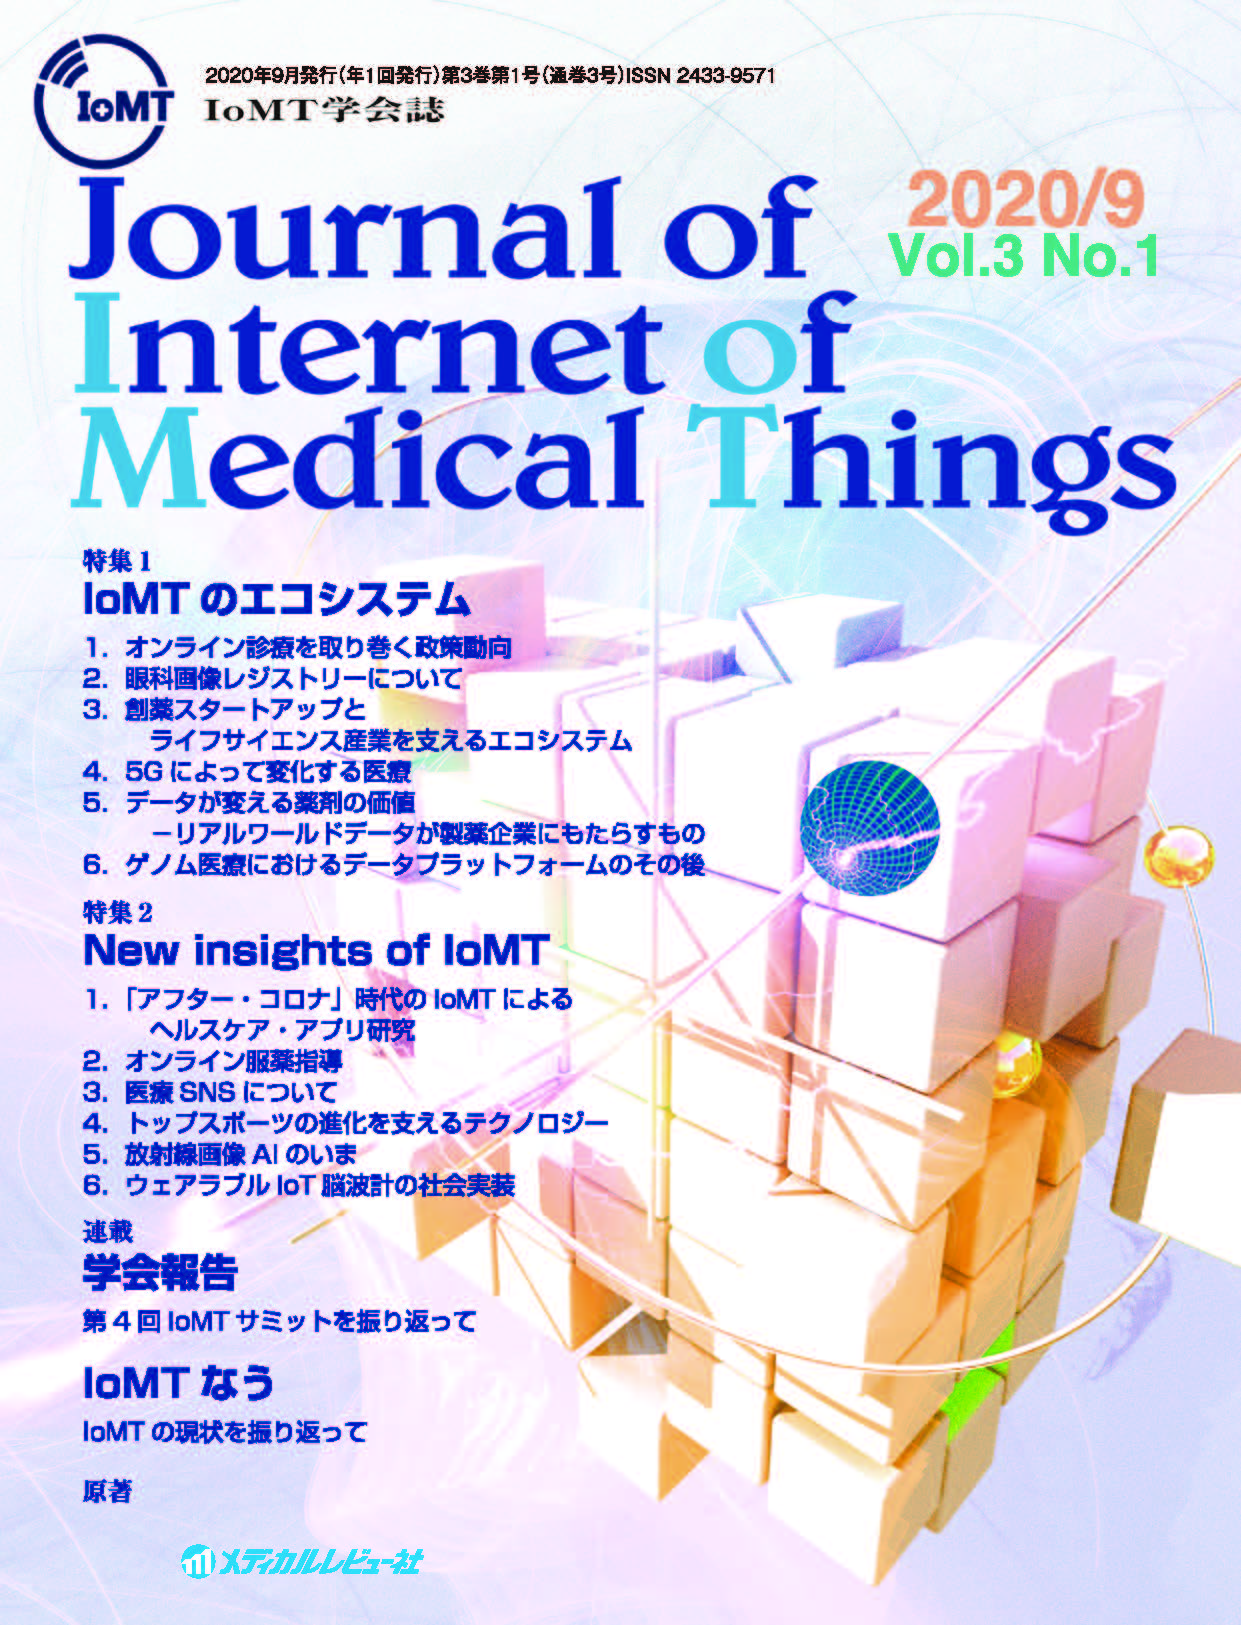 Journal of Internet of Medical Things 2020年9月号（Vol.3 No.1）